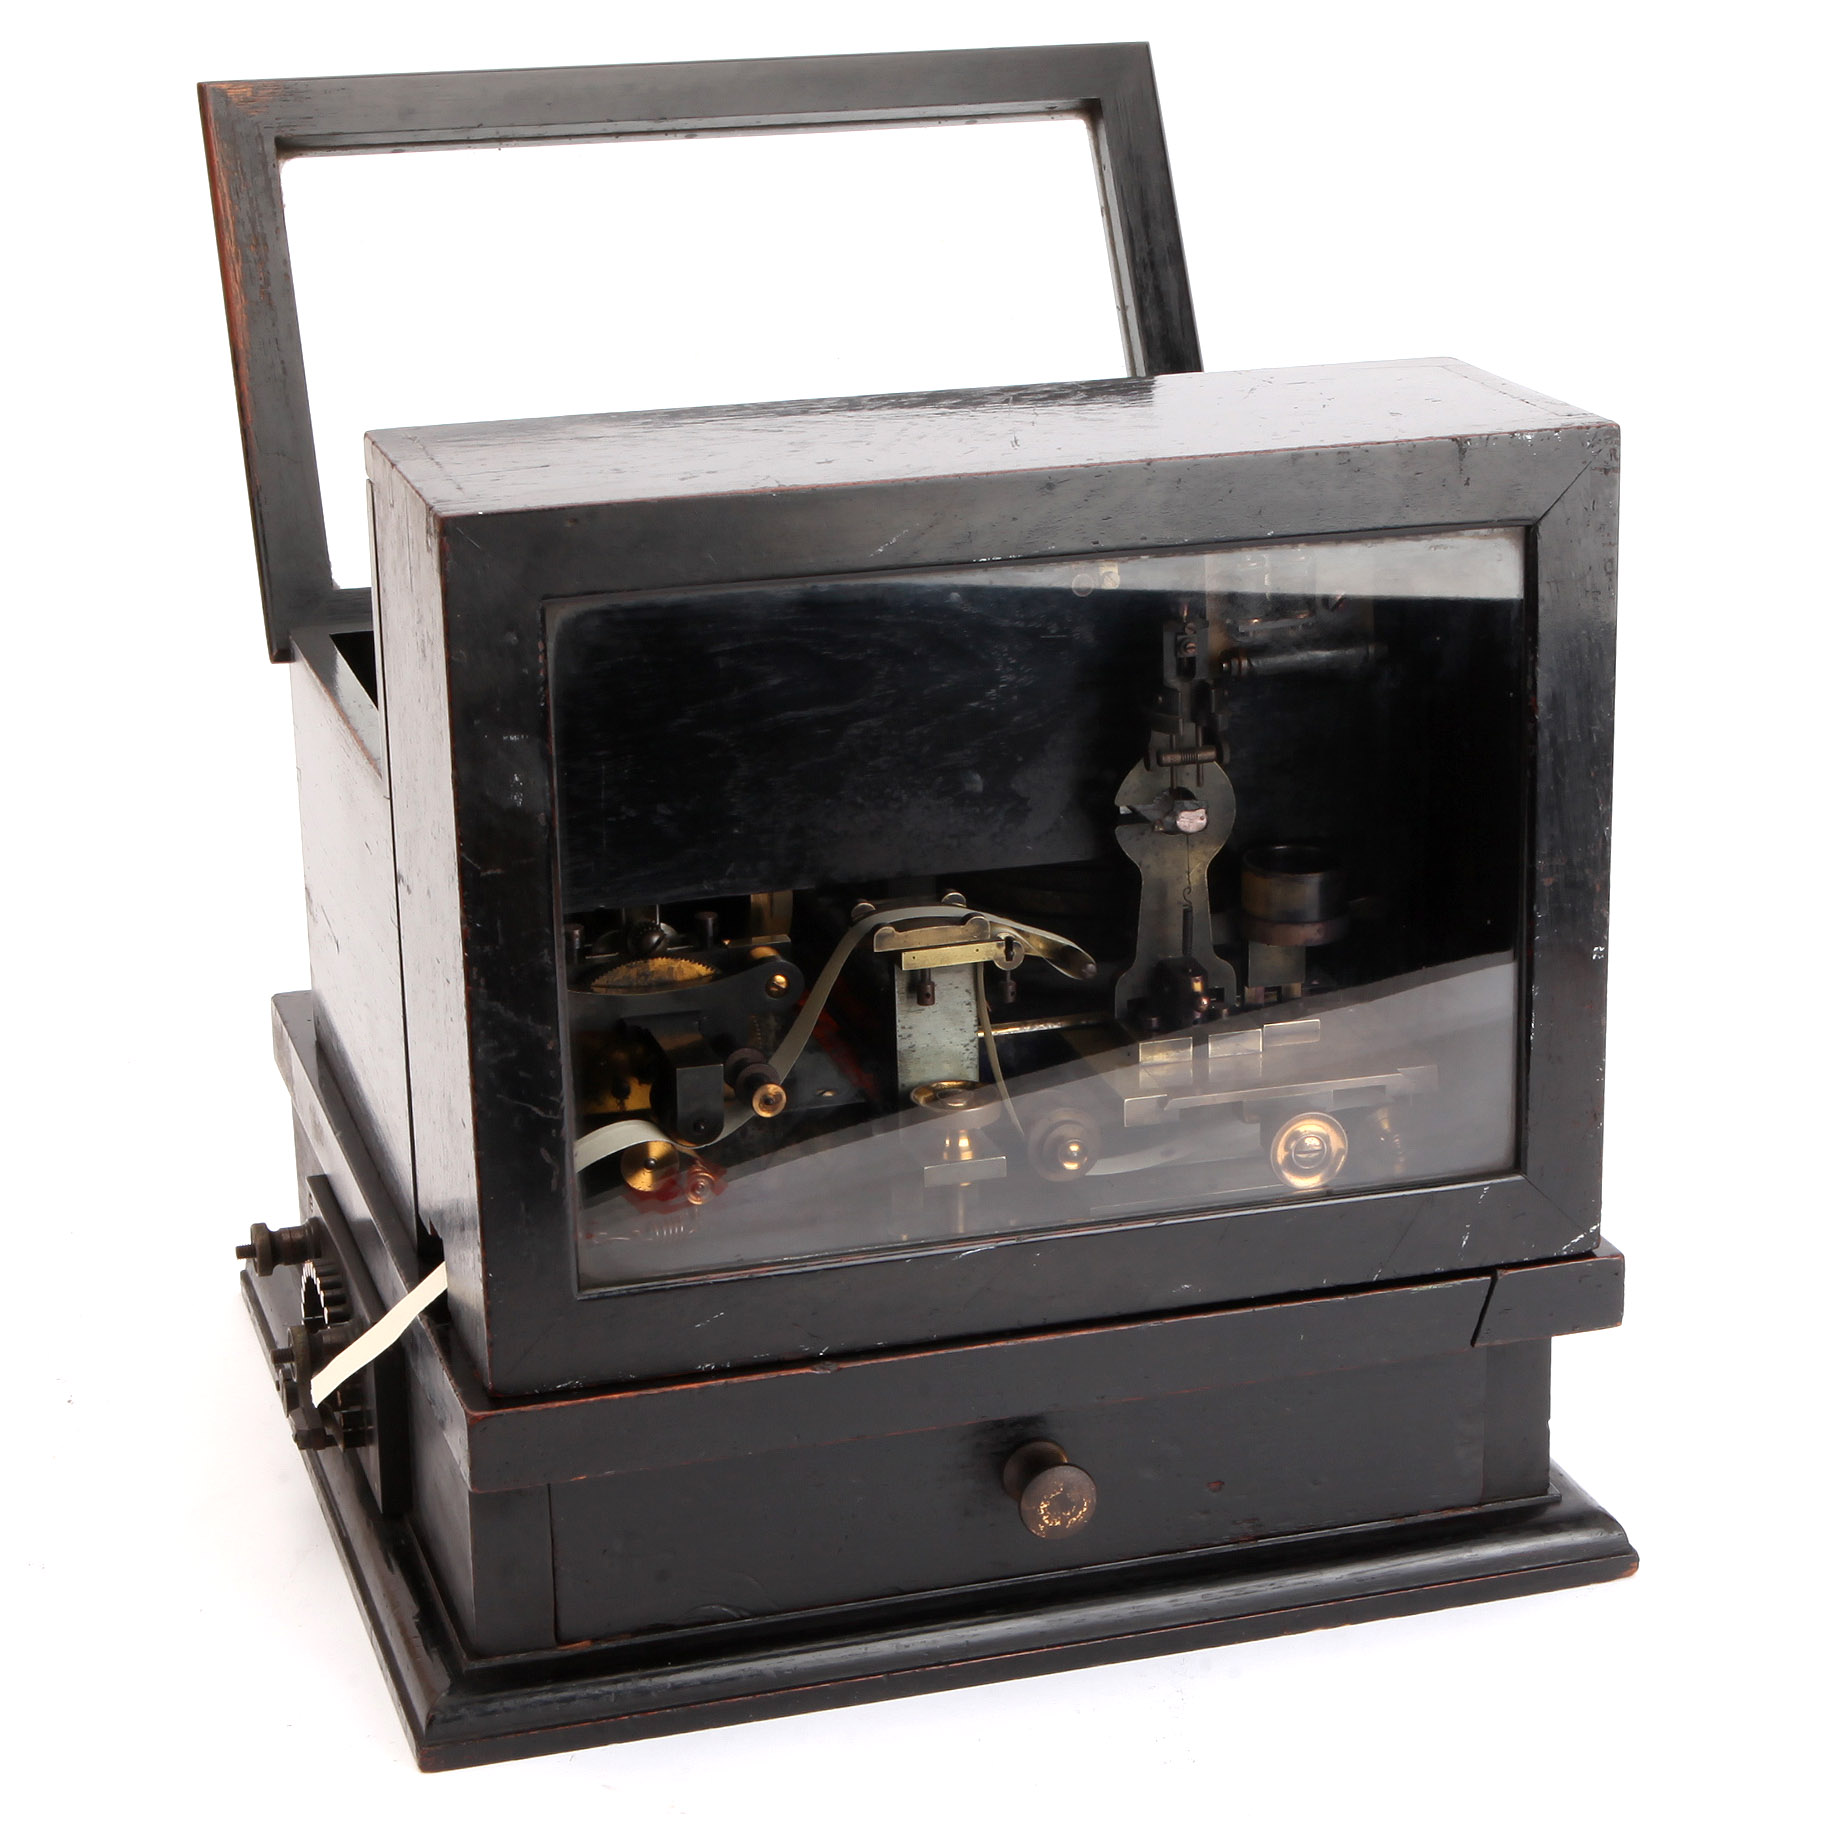 A Telegraph Siphon Recorder By Muirhead & Co. Ltd, Westminster, - Image 7 of 7